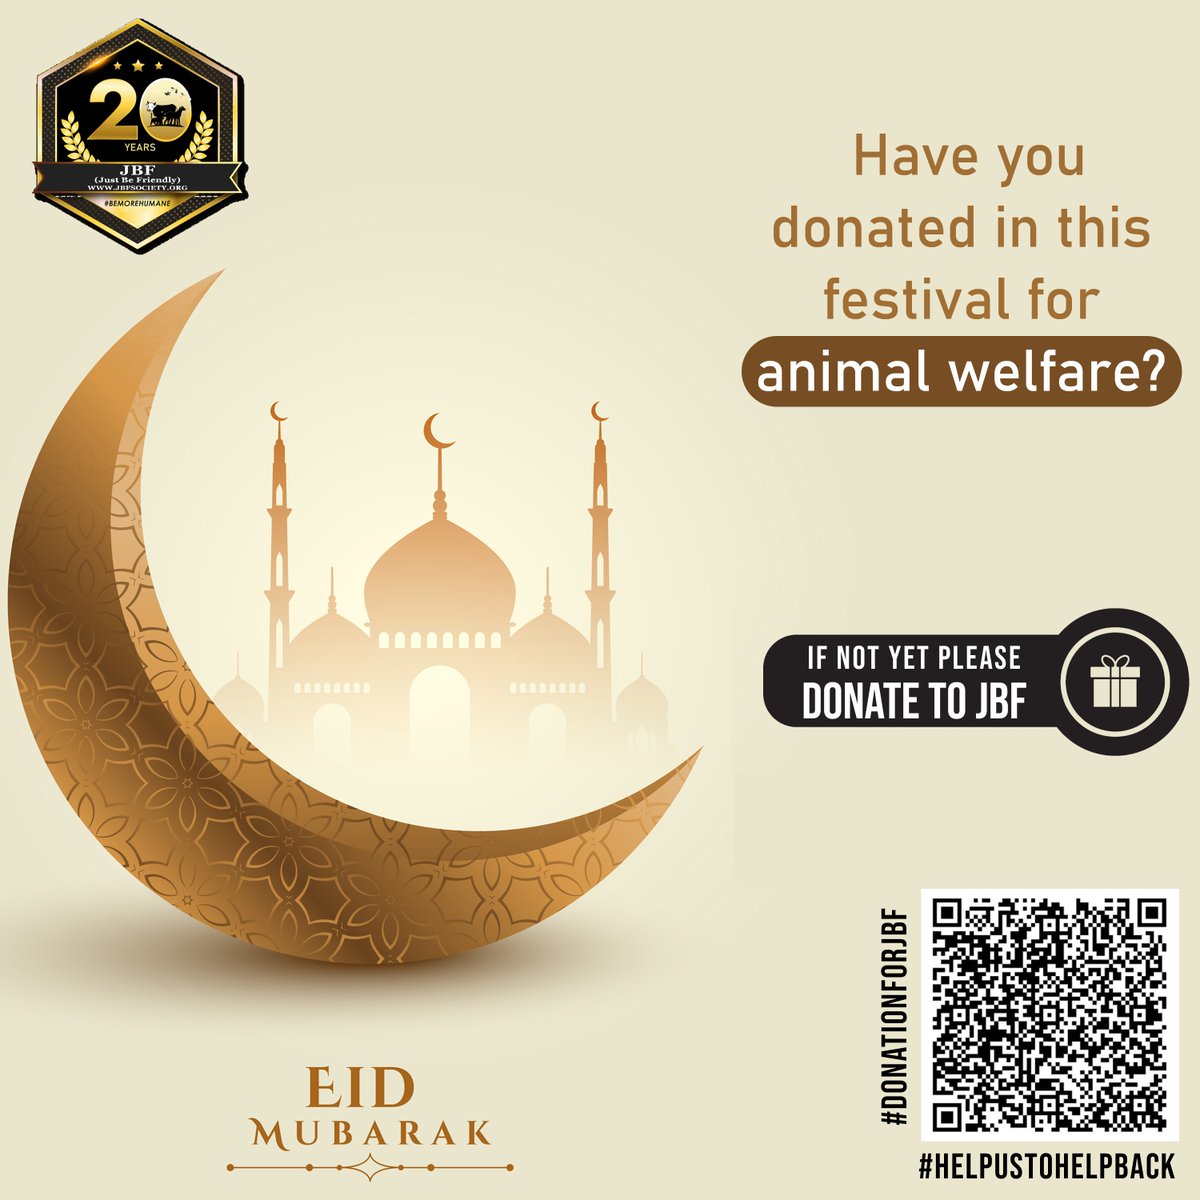 Eid Mubarak to you and your loved ones. May this joyous occasion bring happiness, peace, and blessings to your life. 🕌☪️
.
.
.
.
.
.
.
.
.
#jbf #justbefriendly #jiraw
#donationforjbf #animallovers #helpustohelpthem #eidmubarak
#helpustohelpback #joy
#explore #togetherness